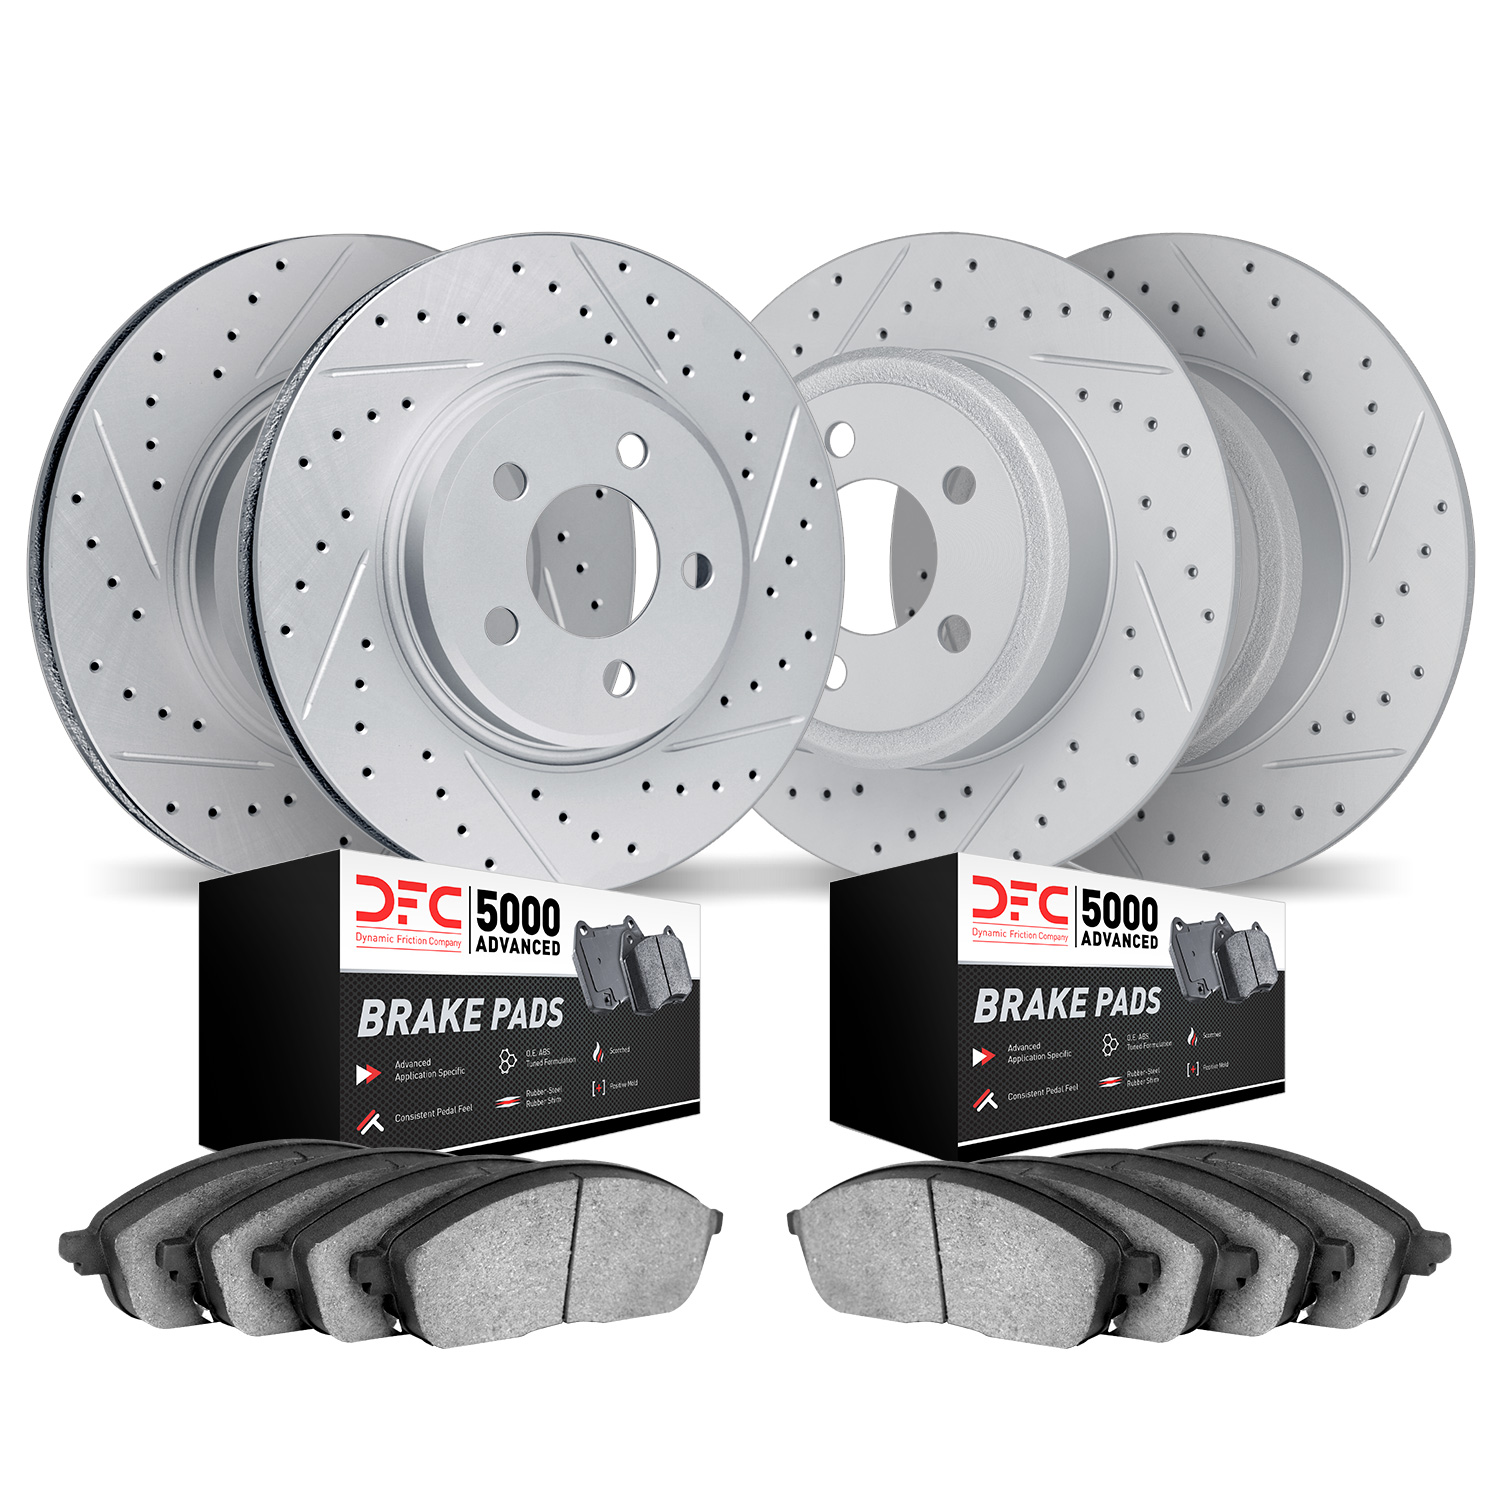 2504-45018 Geoperformance Drilled/Slotted Rotors w/5000 Advanced Brake Pads Kit, 2011-2016 GM, Position: Front and Rear